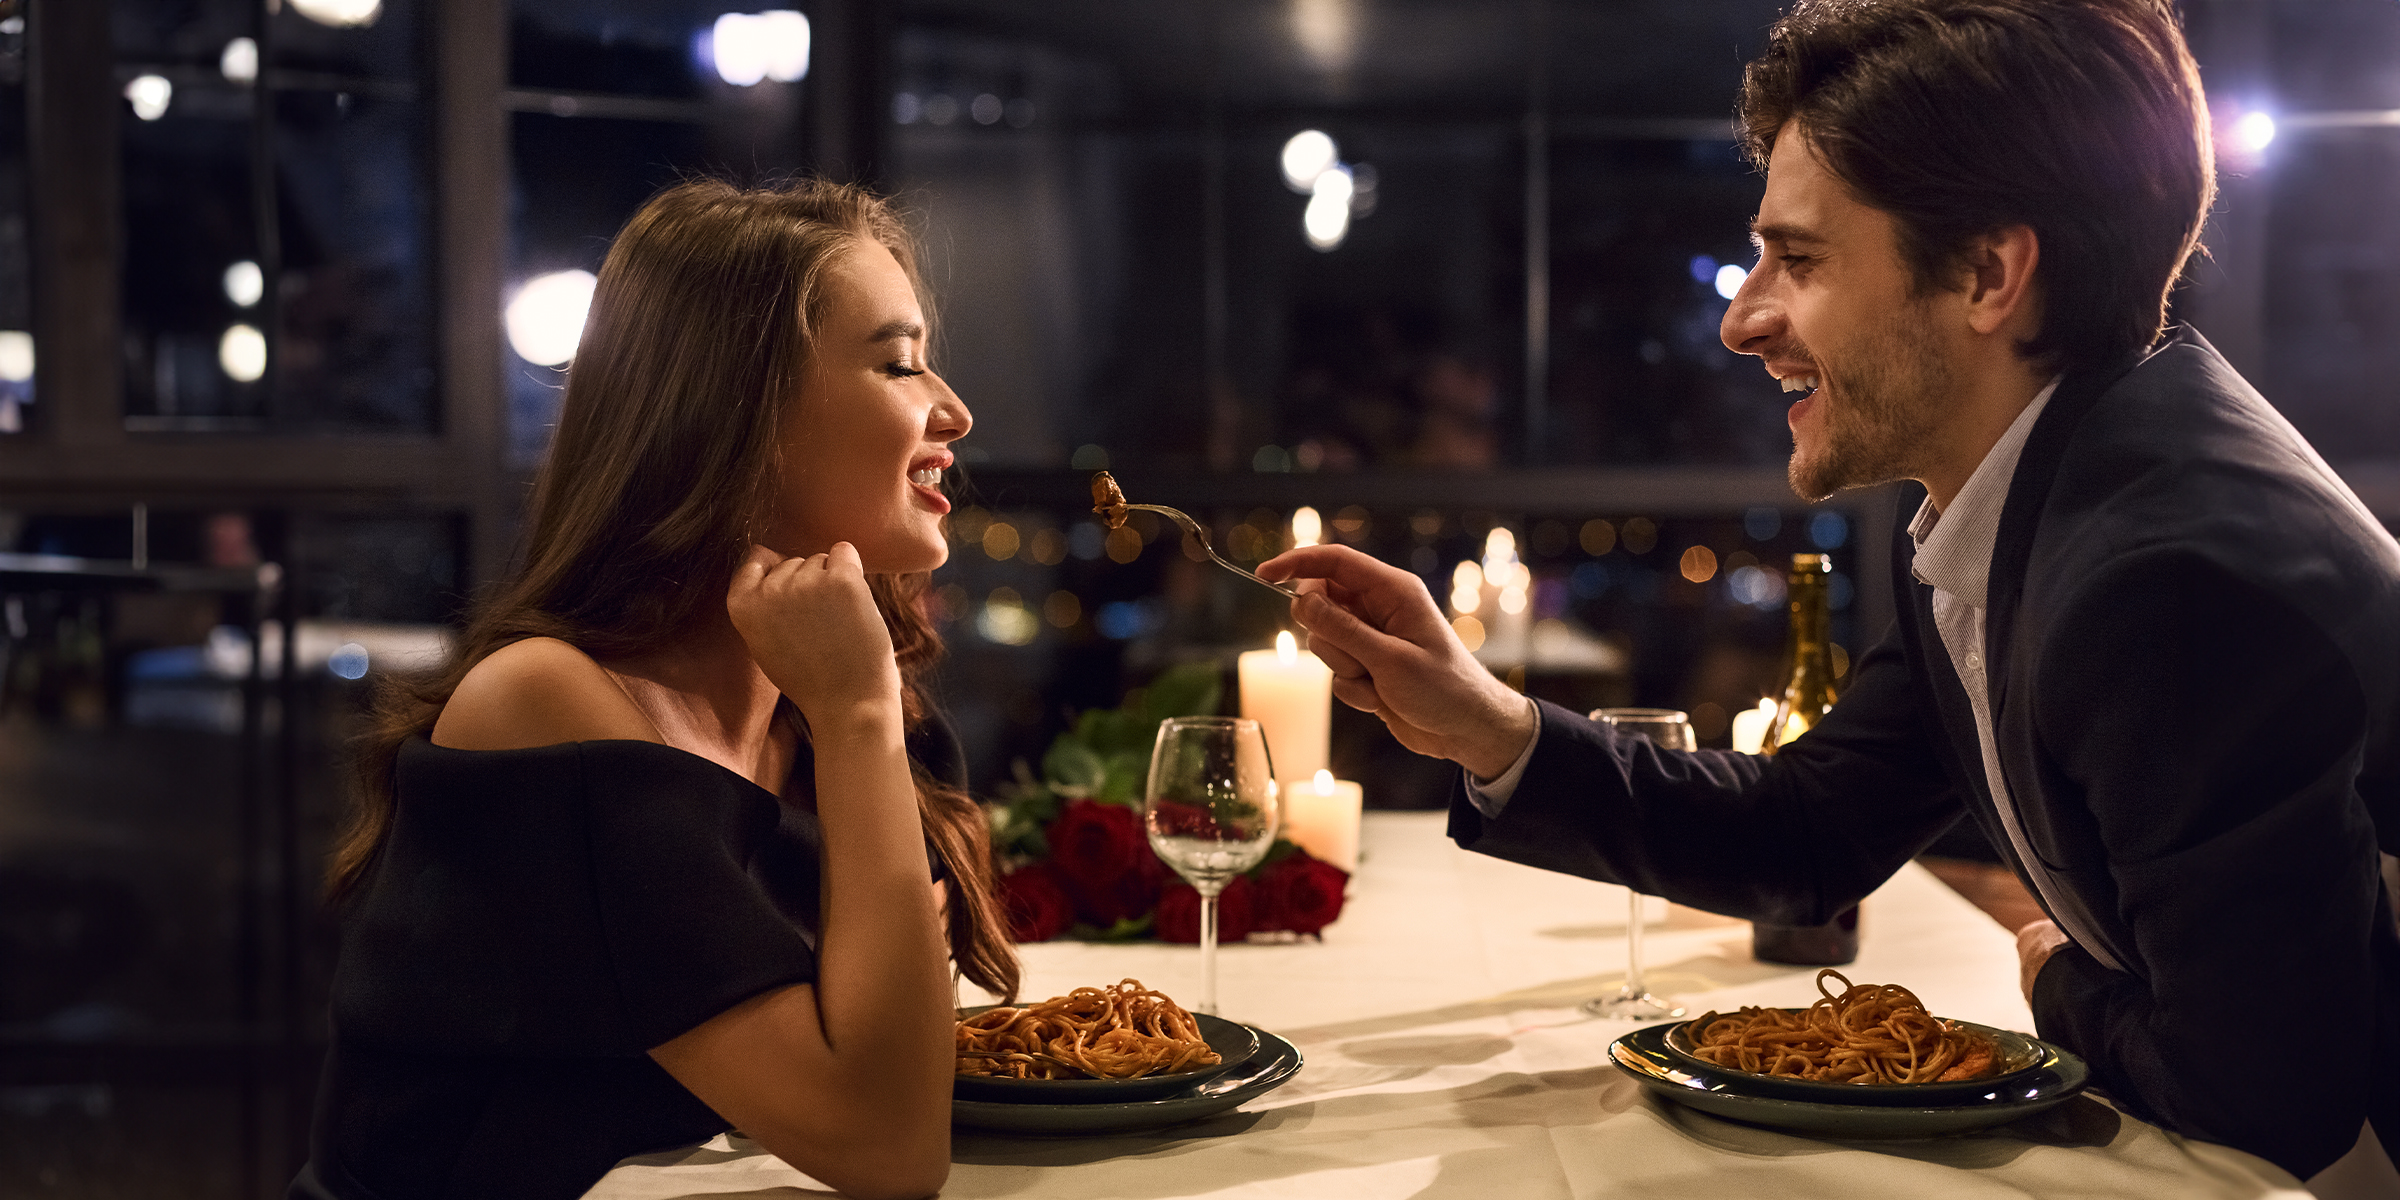 A couple on date | Source: Shutterstock